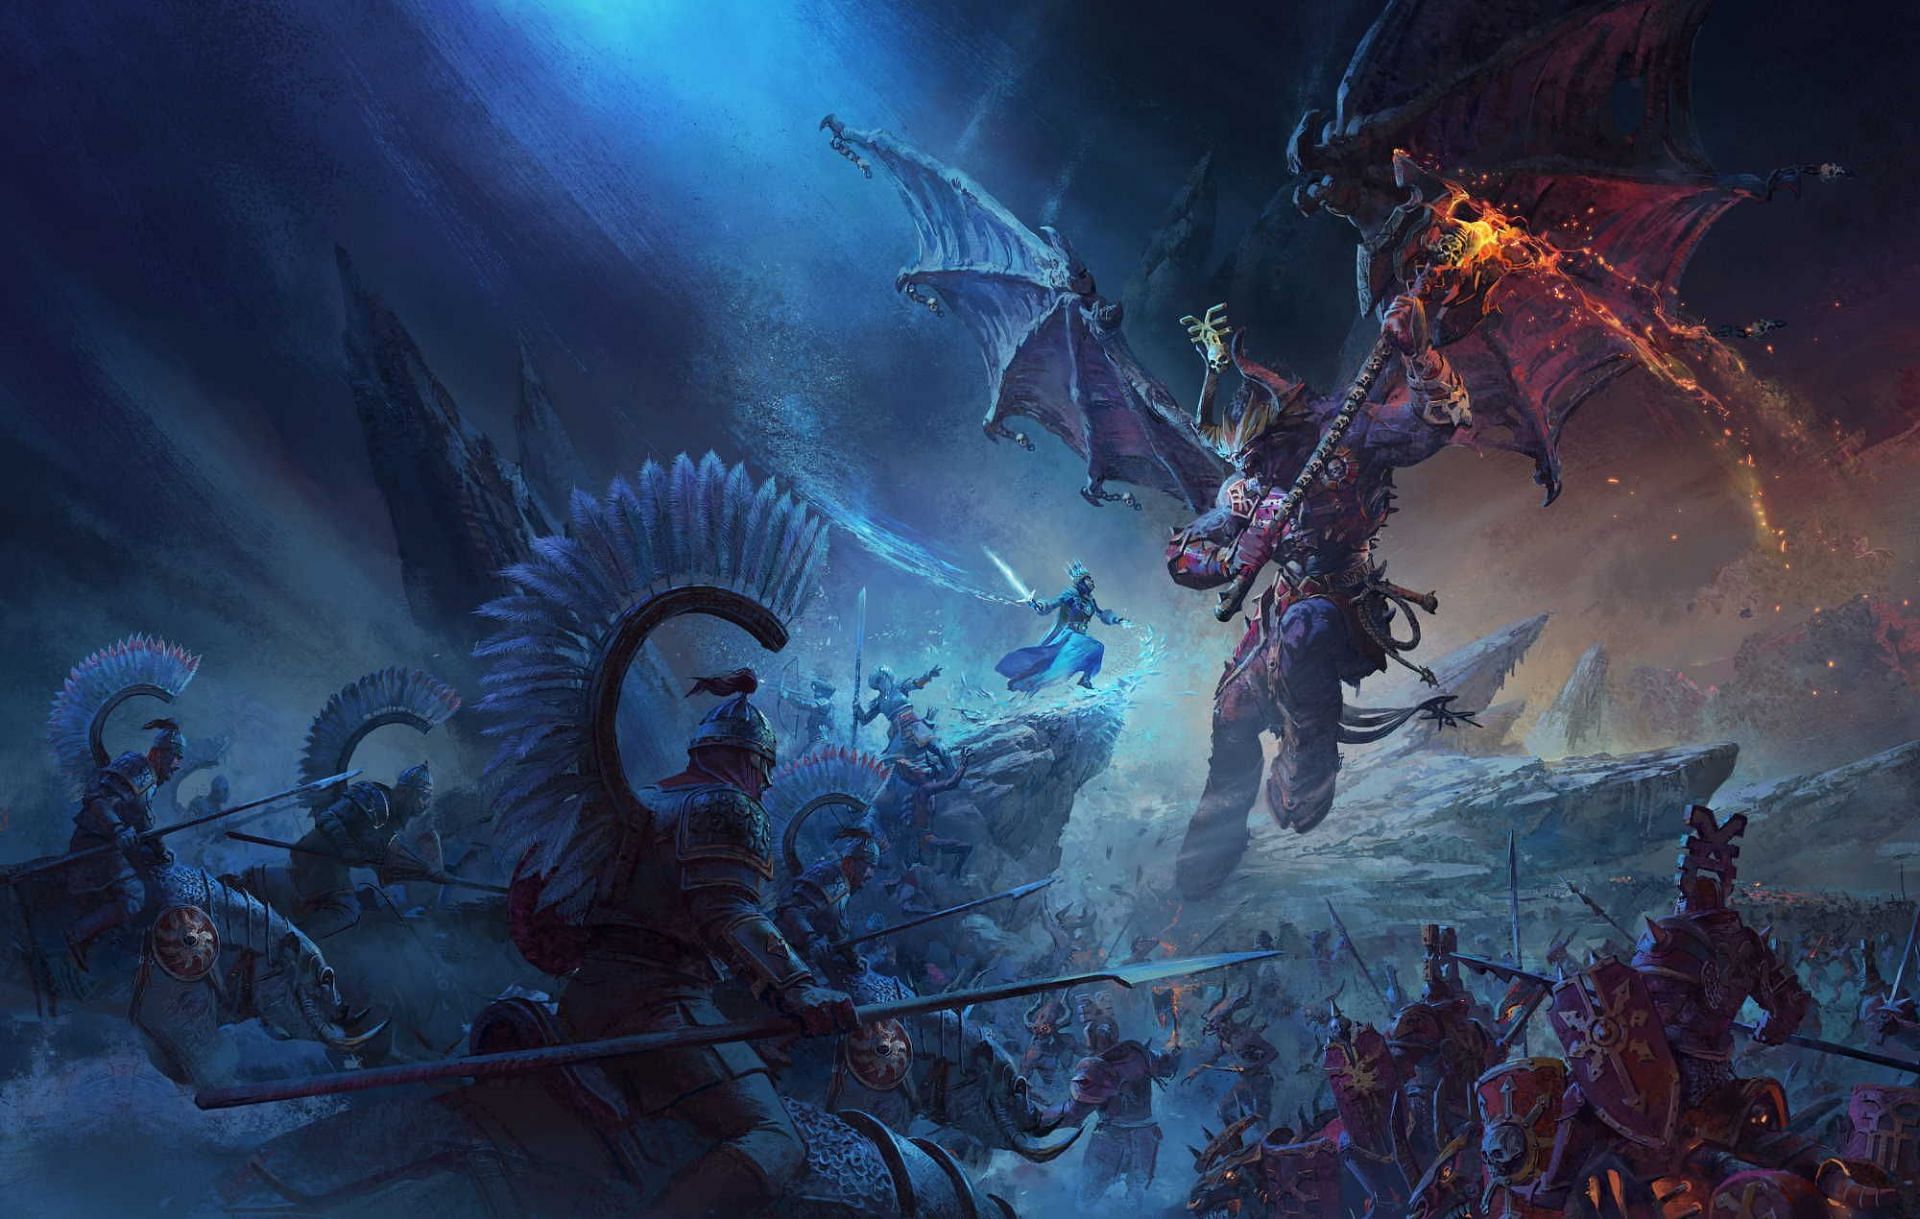 Able to surprise their foes with magical teleporation, the foes of Tzeentch never stood a chance (Image via Creative Assembly)